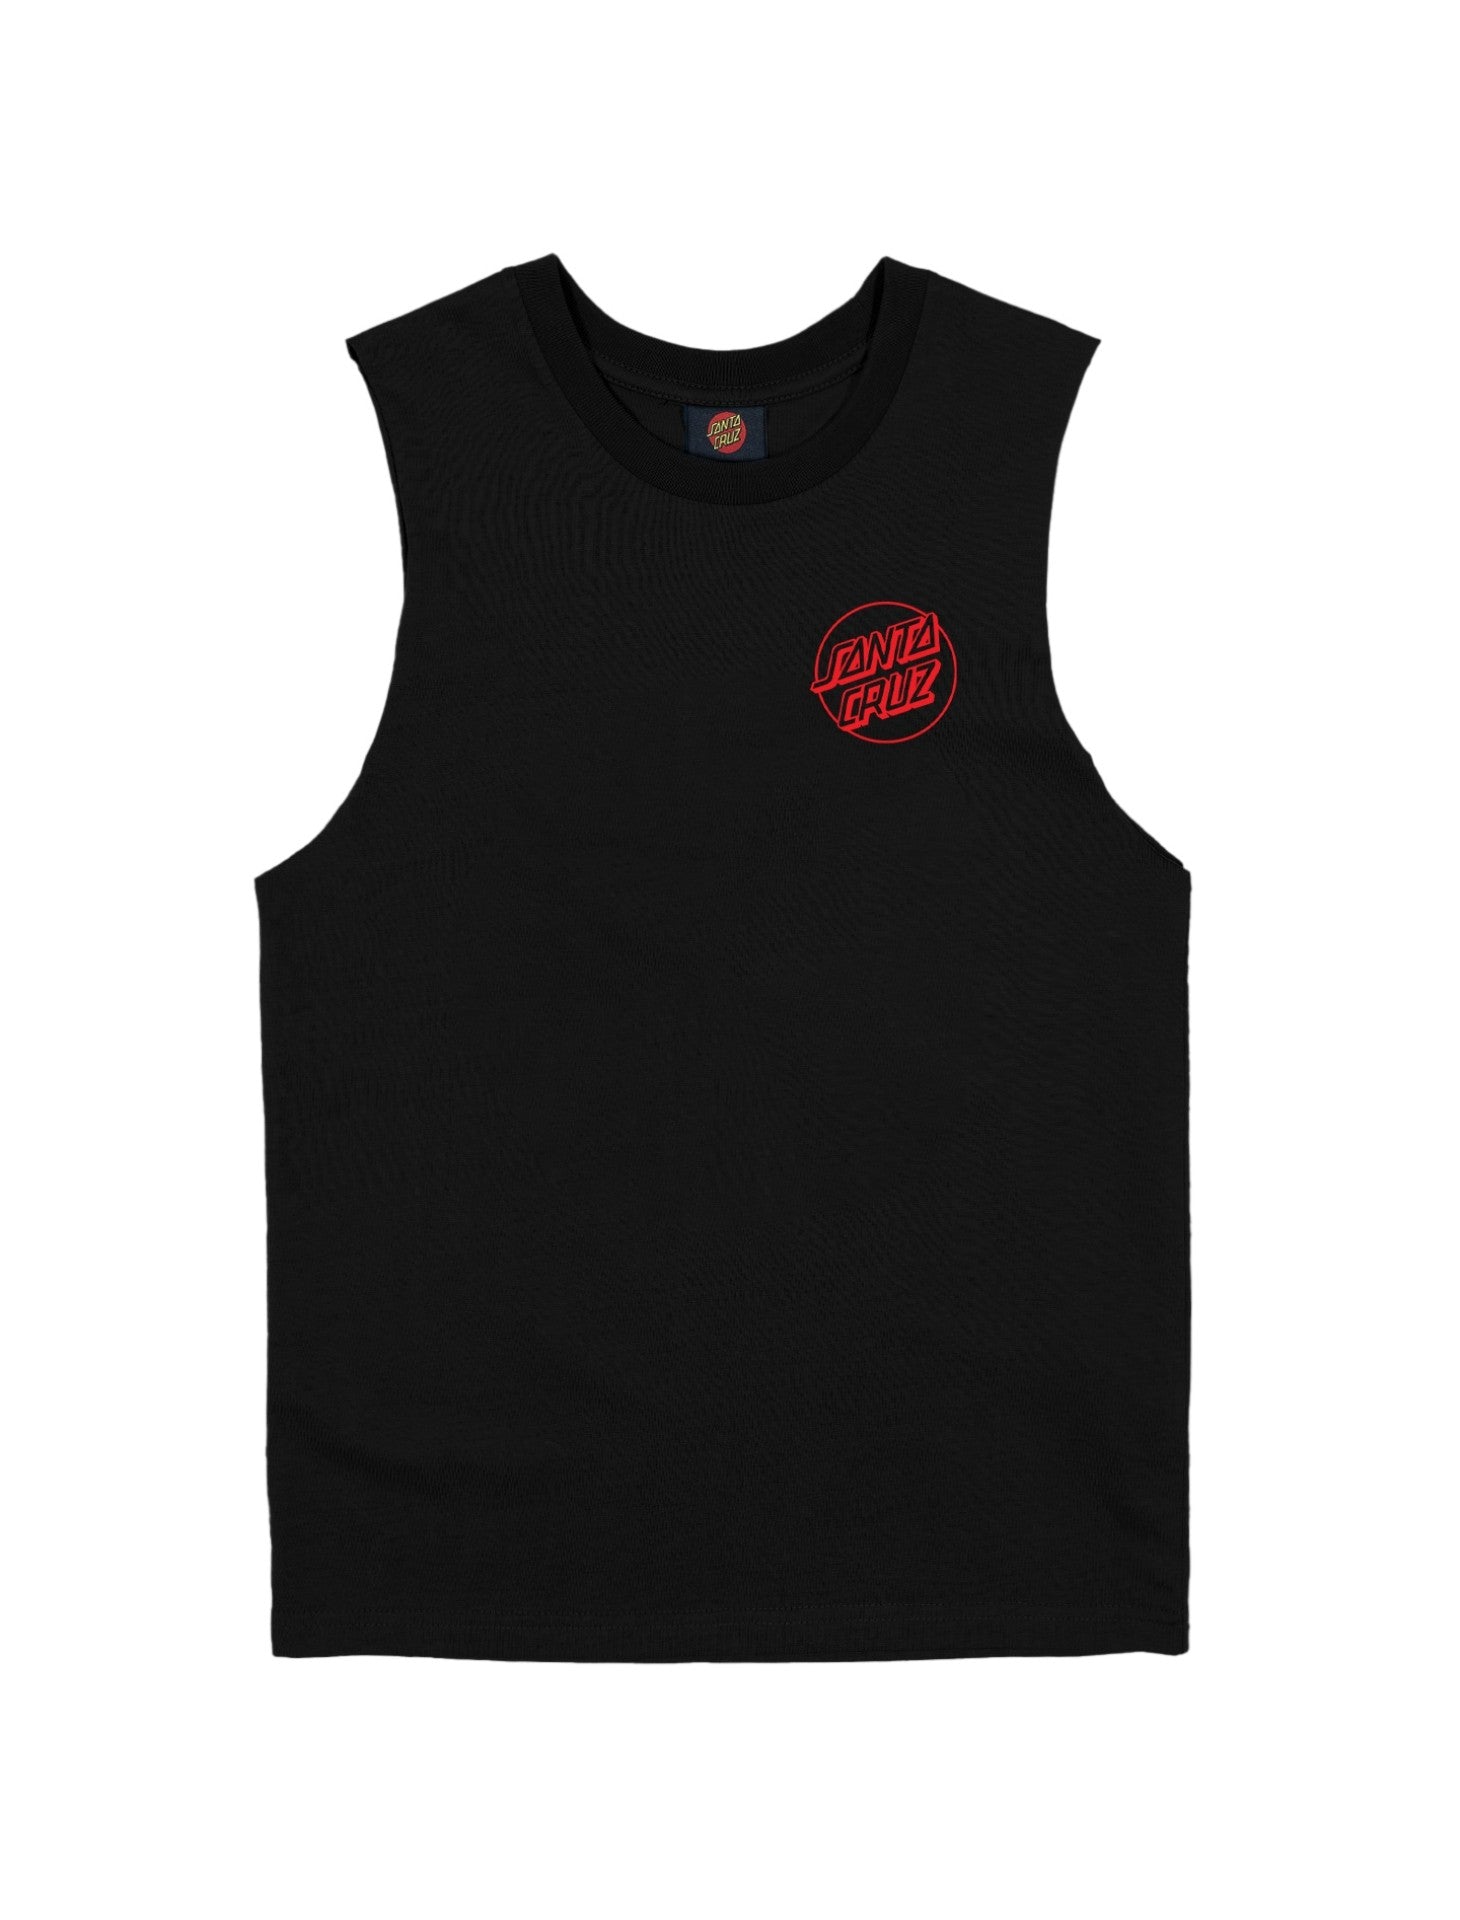 YOUTH OPUS SCREAMING HAND MUSCLE TEE